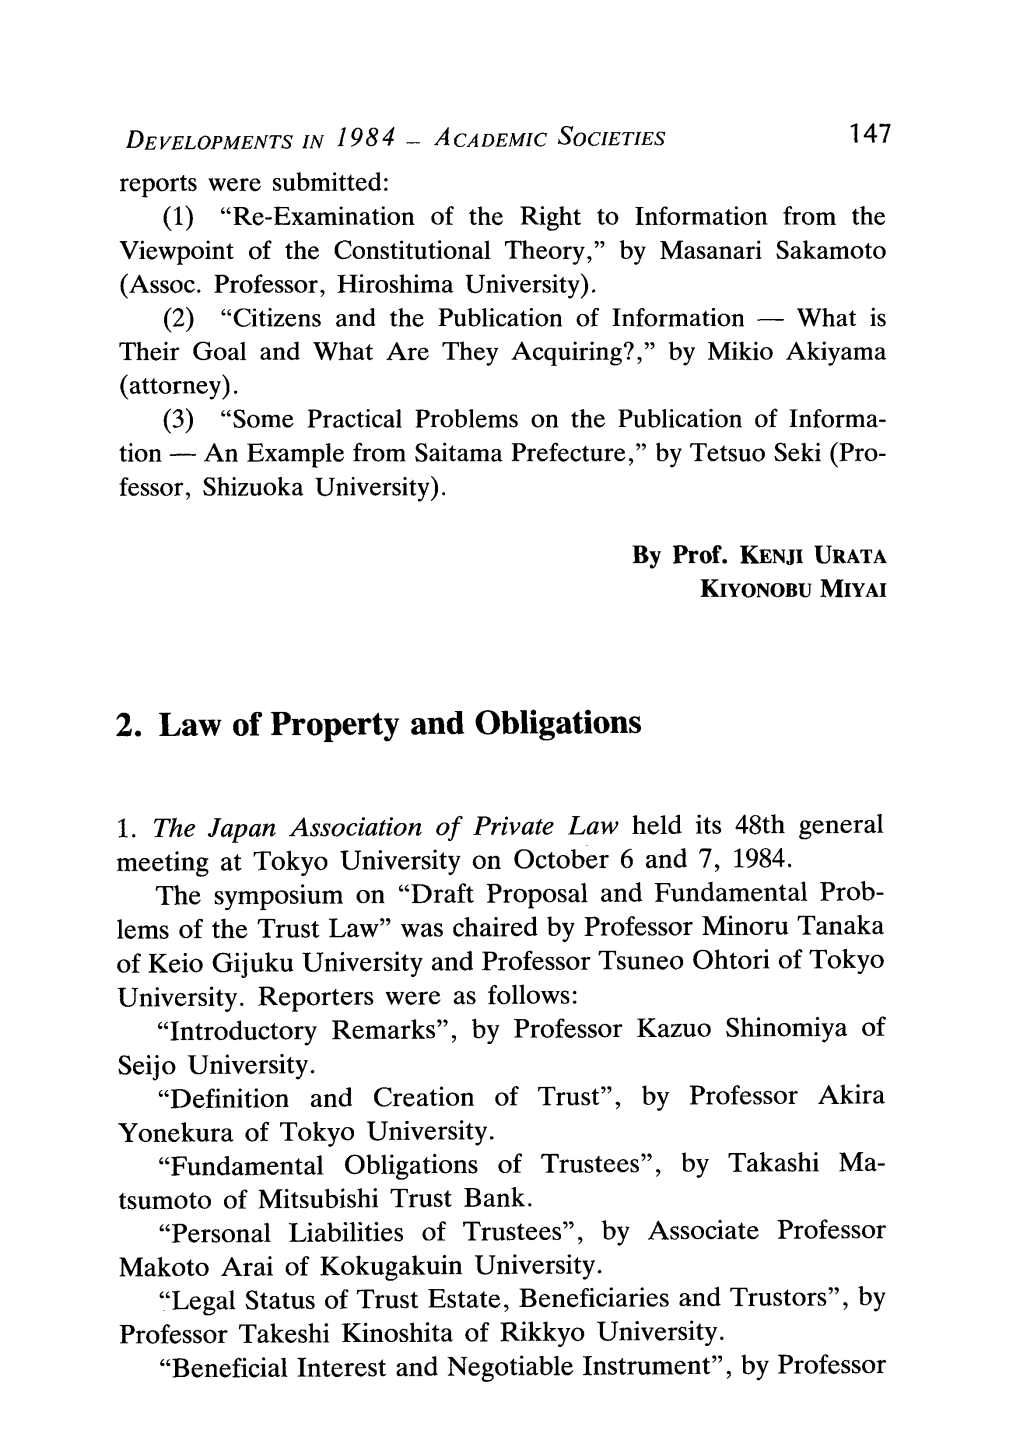 2. Law of Property and Obligations